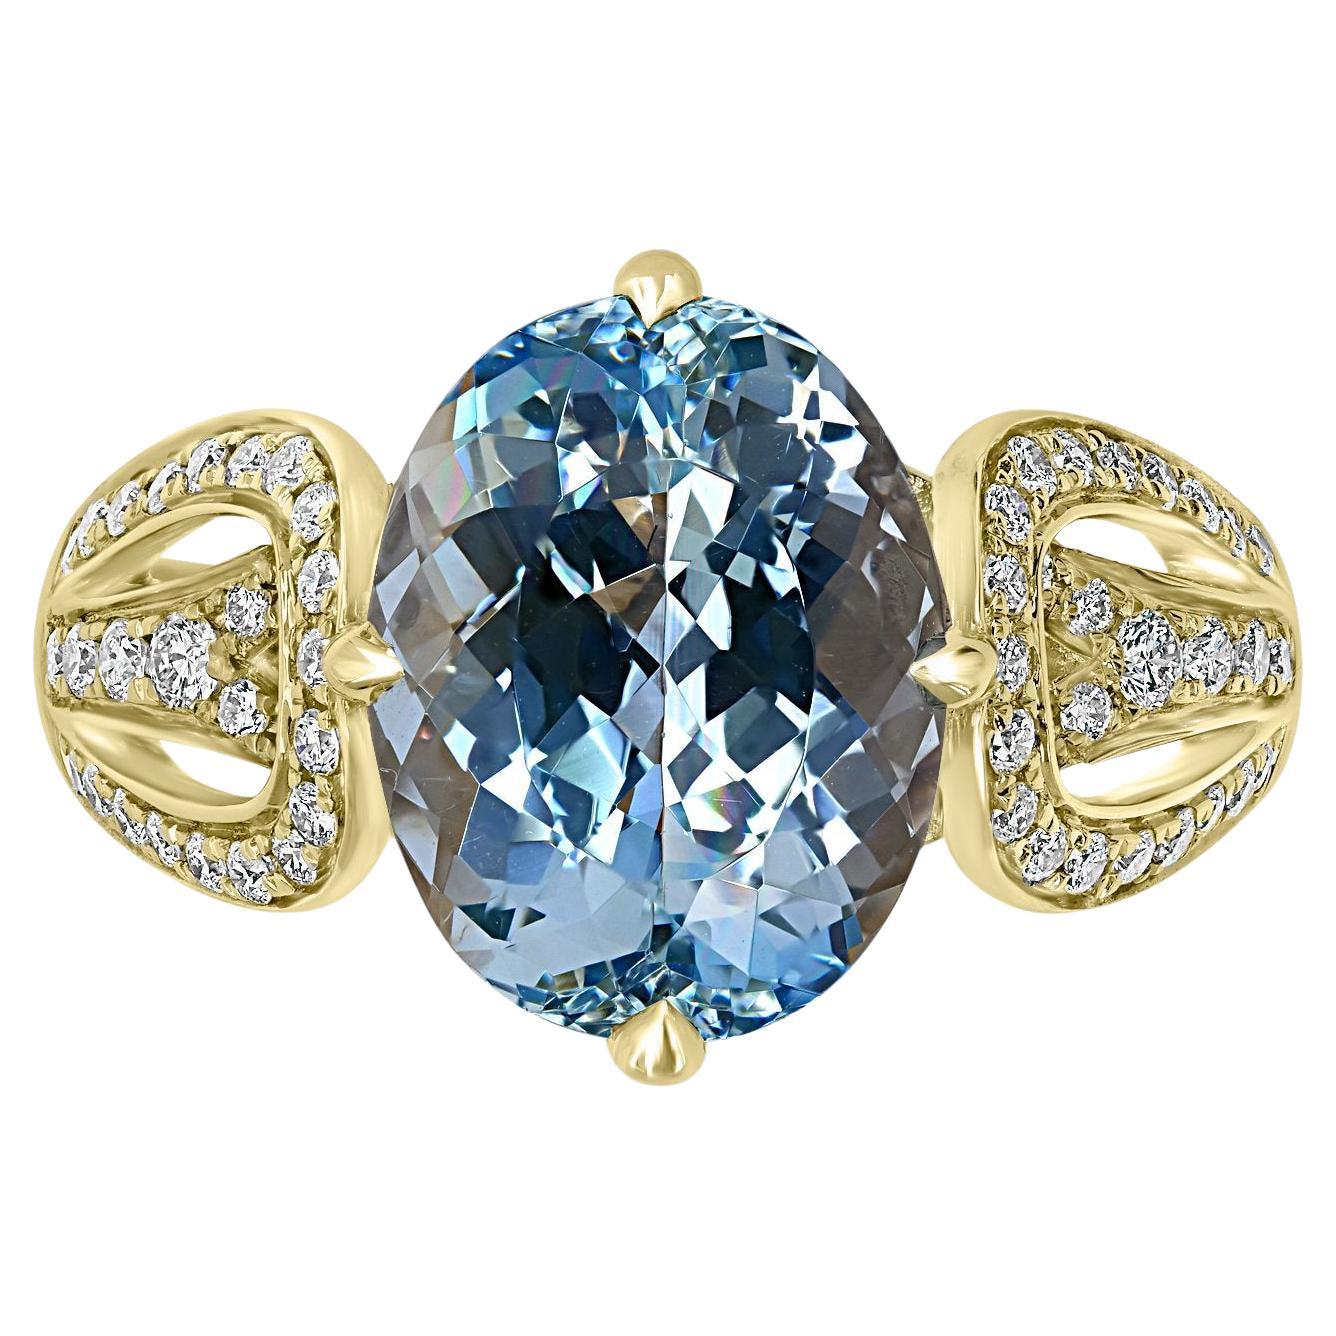 4.02ct Aquamarine Ring with 0.3Tct Diamonds Set in 14K Yellow Gold For Sale